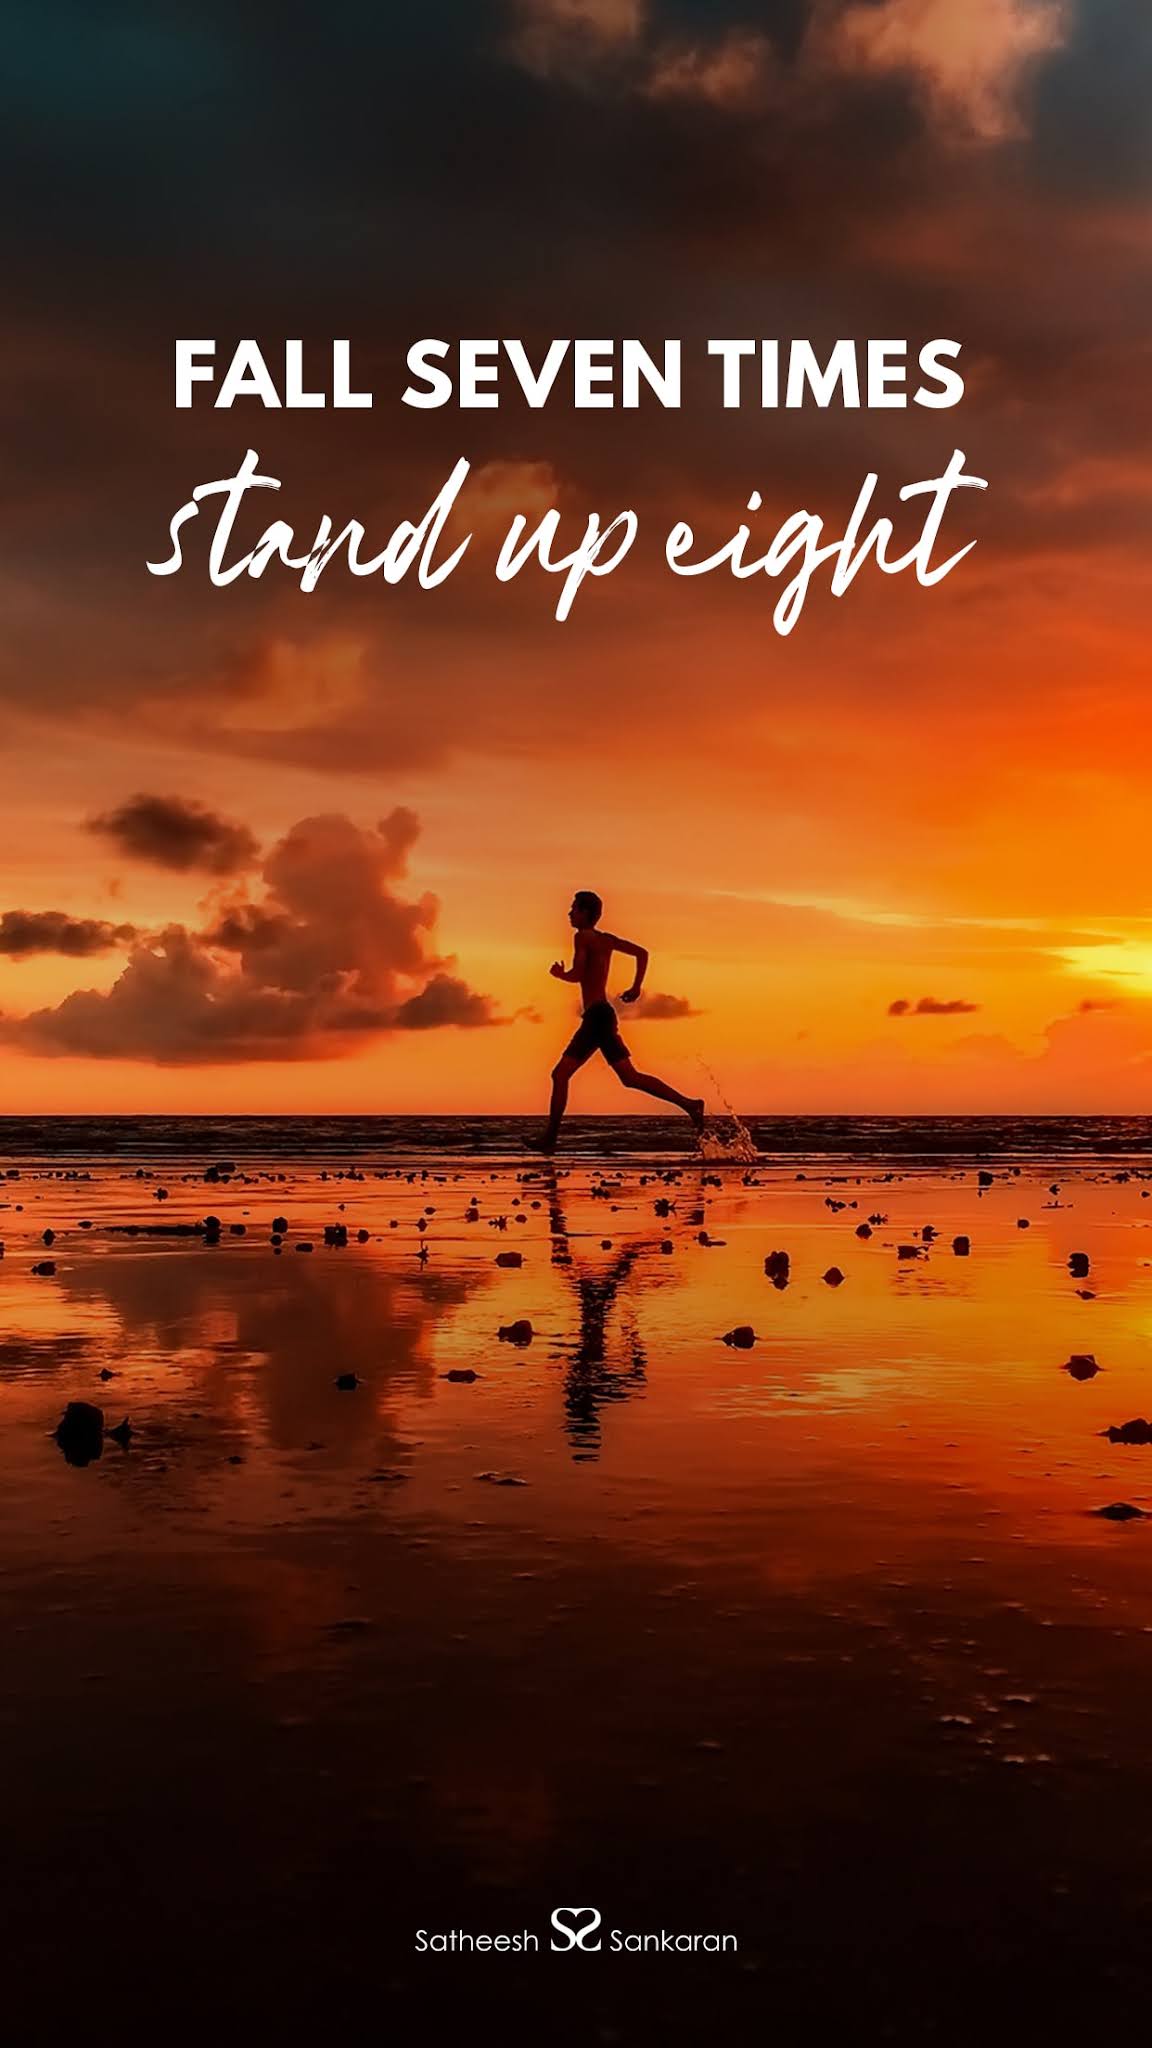 109 Awesome HD mobile wallpapers that will motivate and inspire you everyday